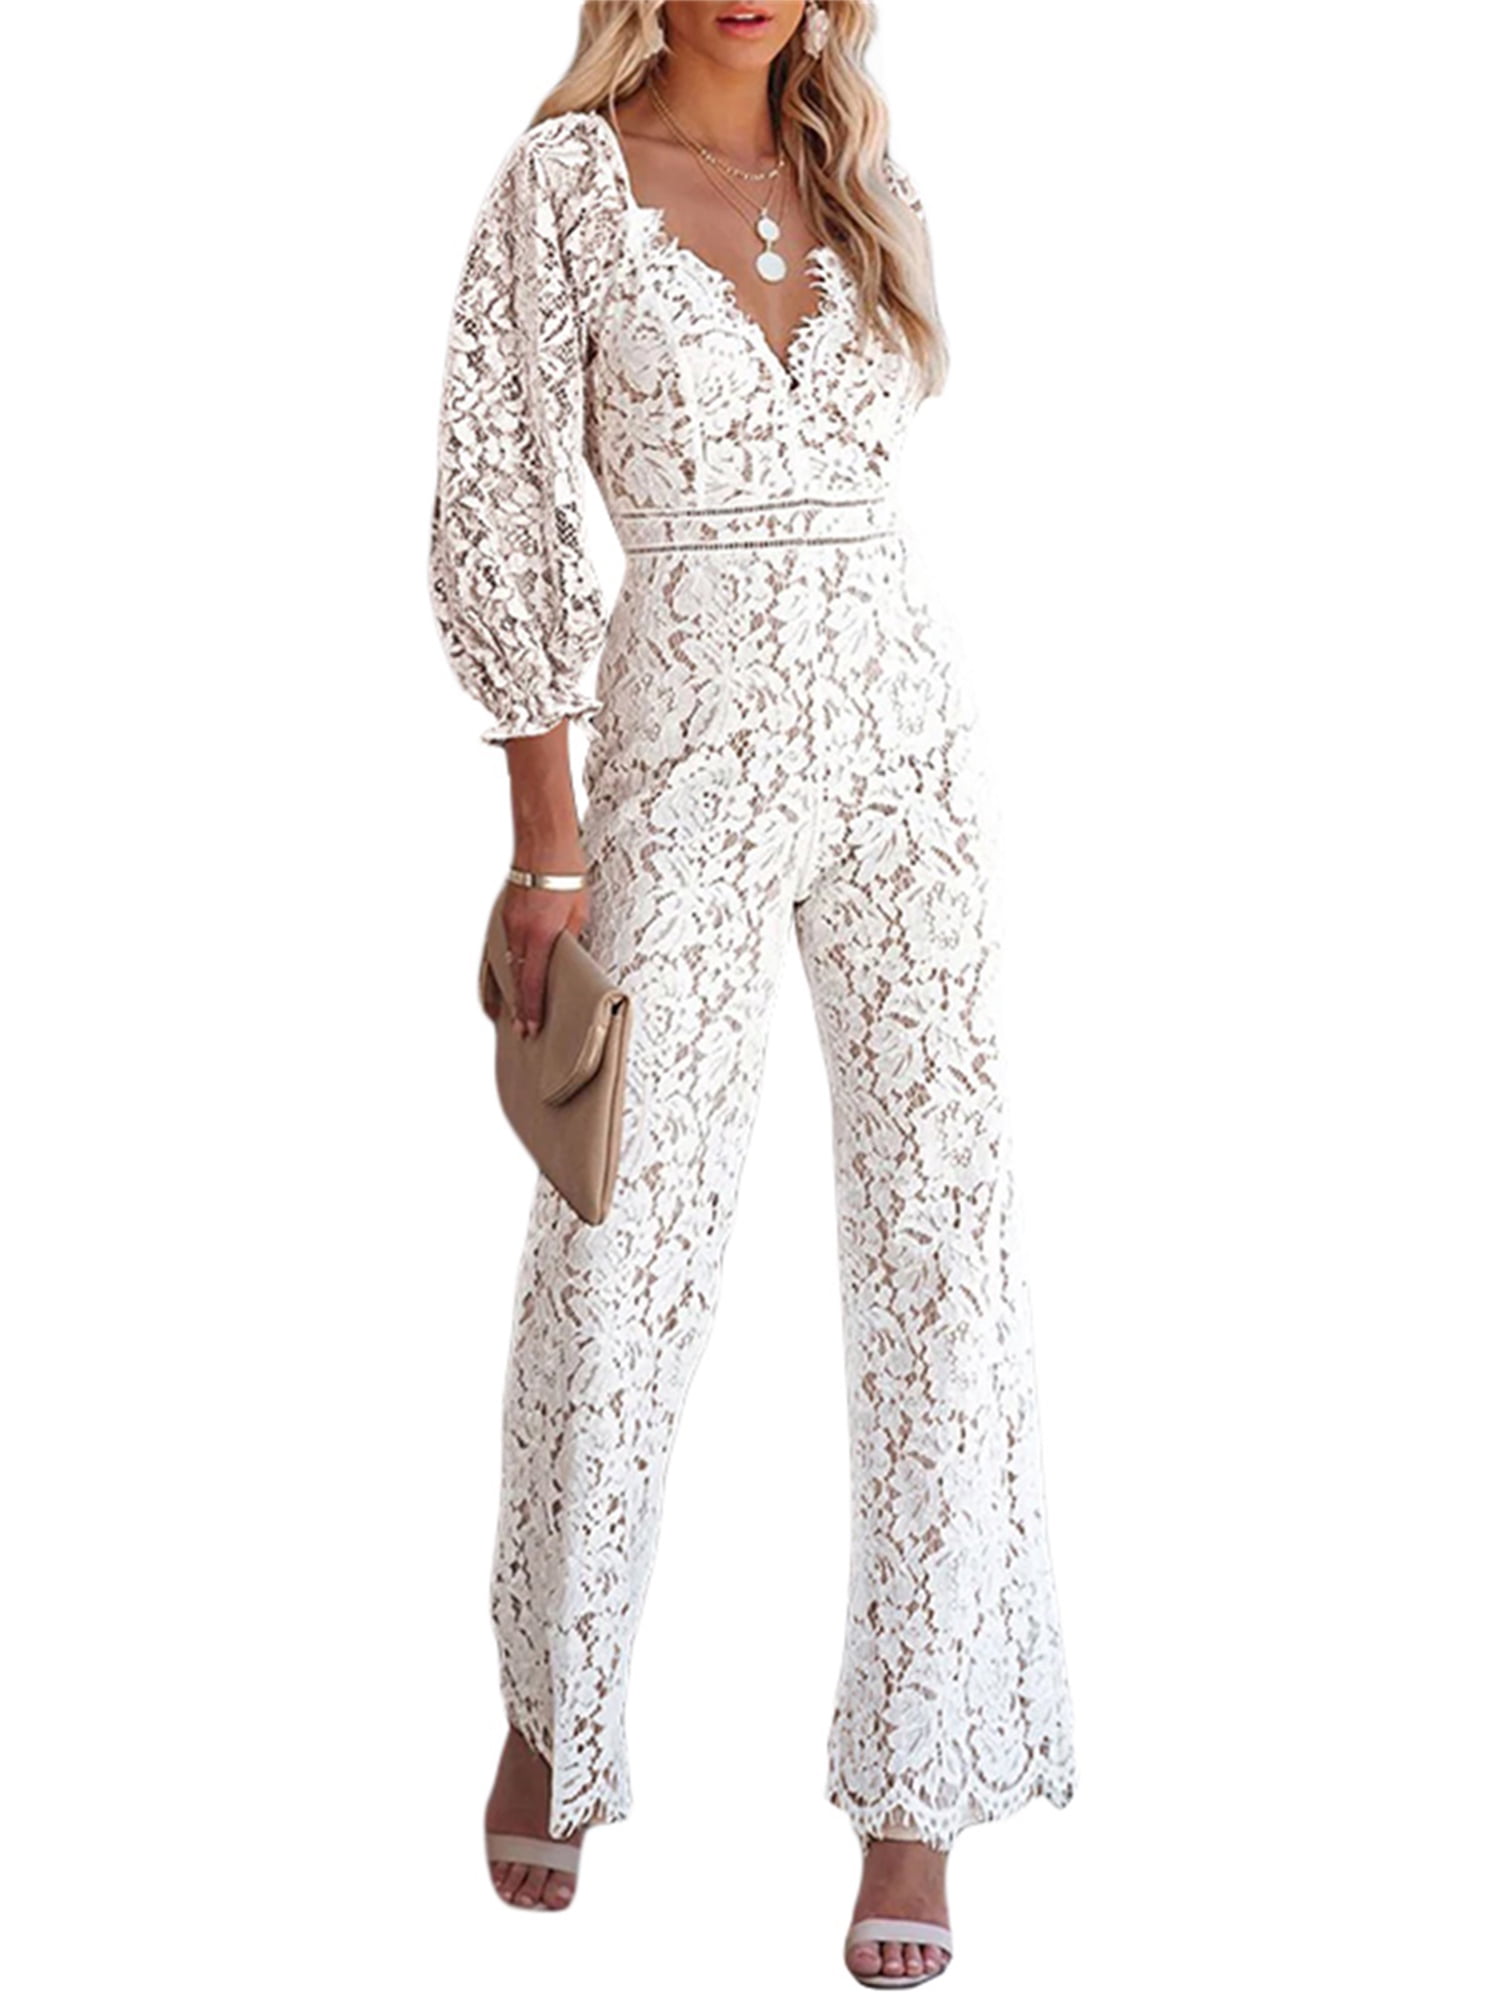 Discover 147+ occasions to wear jumpsuits